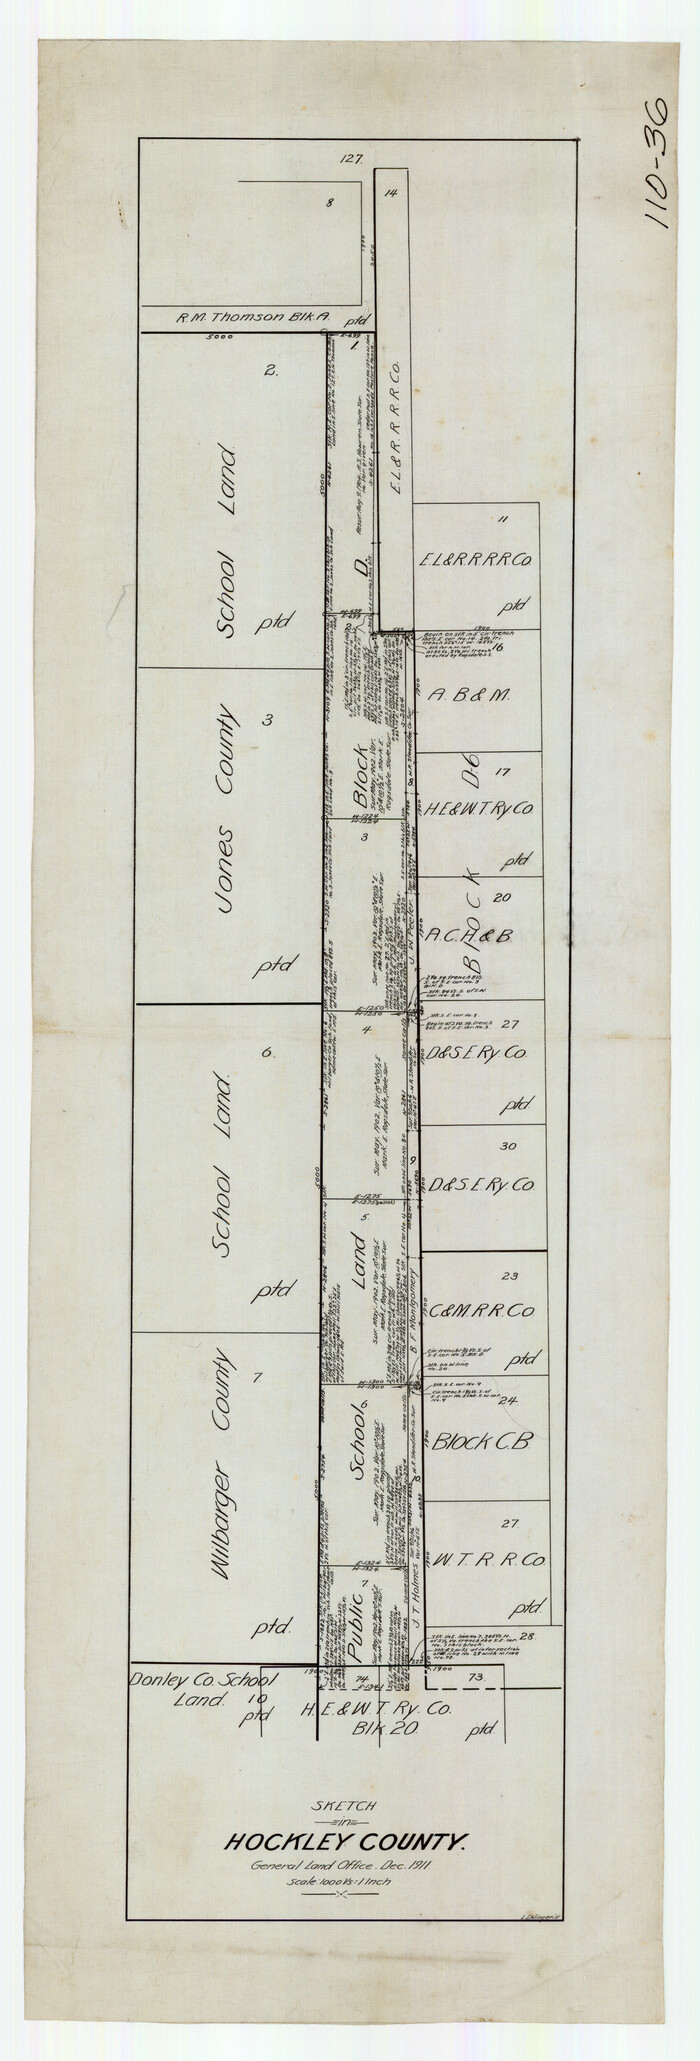 91199, Sketch in Hockley County, Texas, Twichell Survey Records